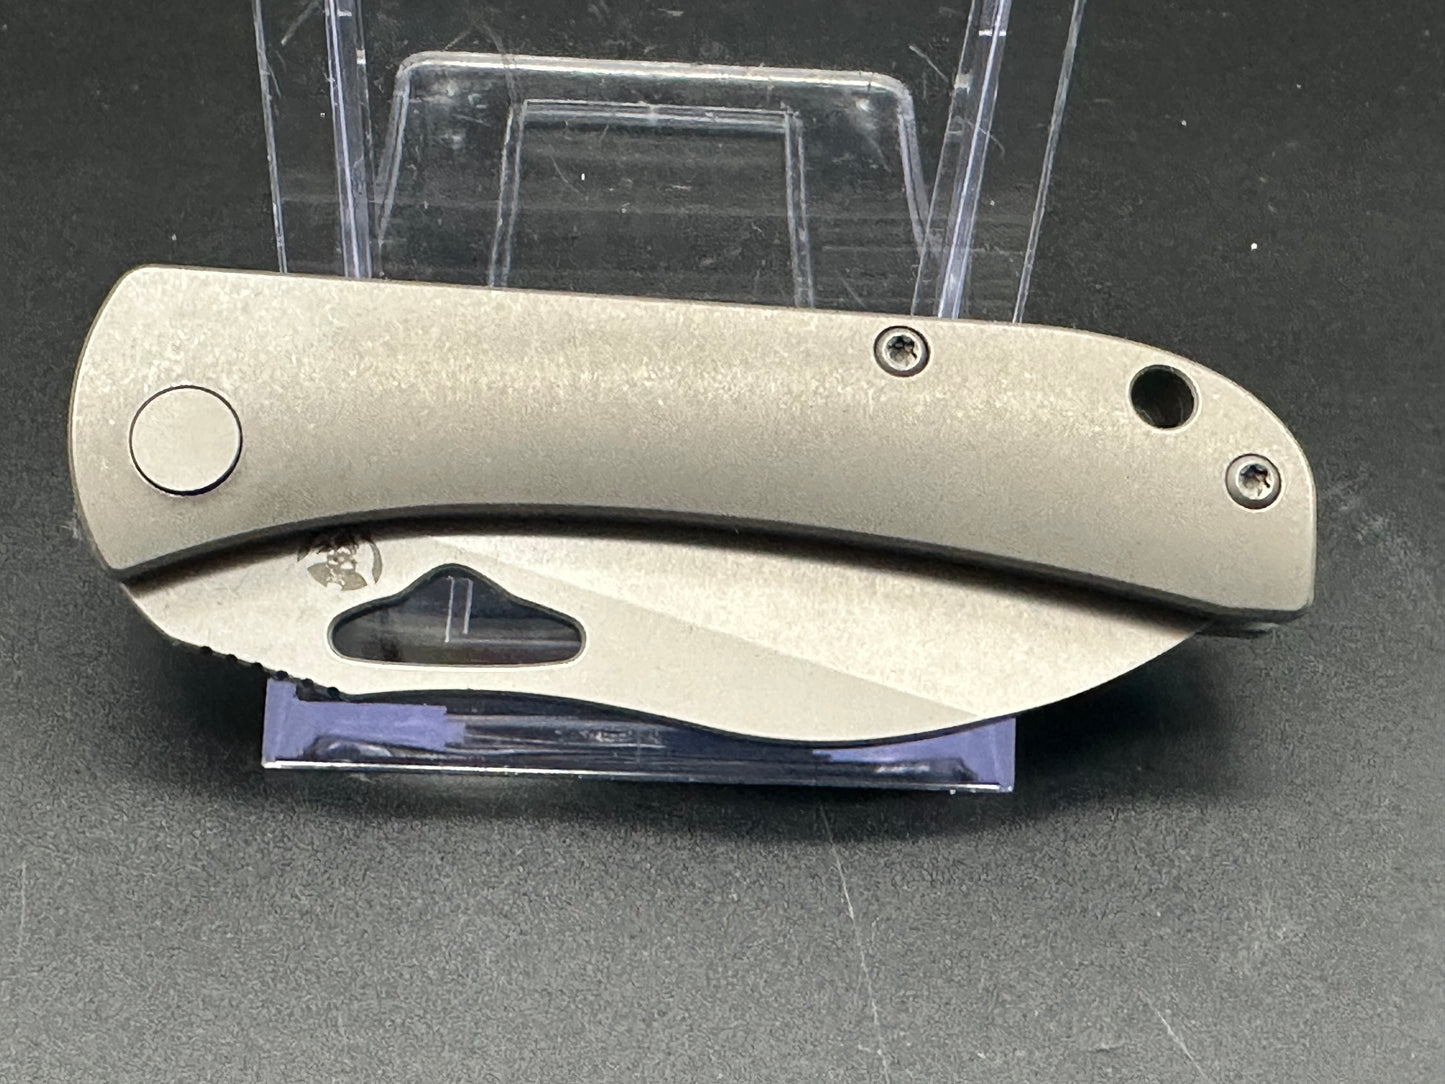 Picaroon Mutineer Full titanium w/extra micarta scale and liner frame